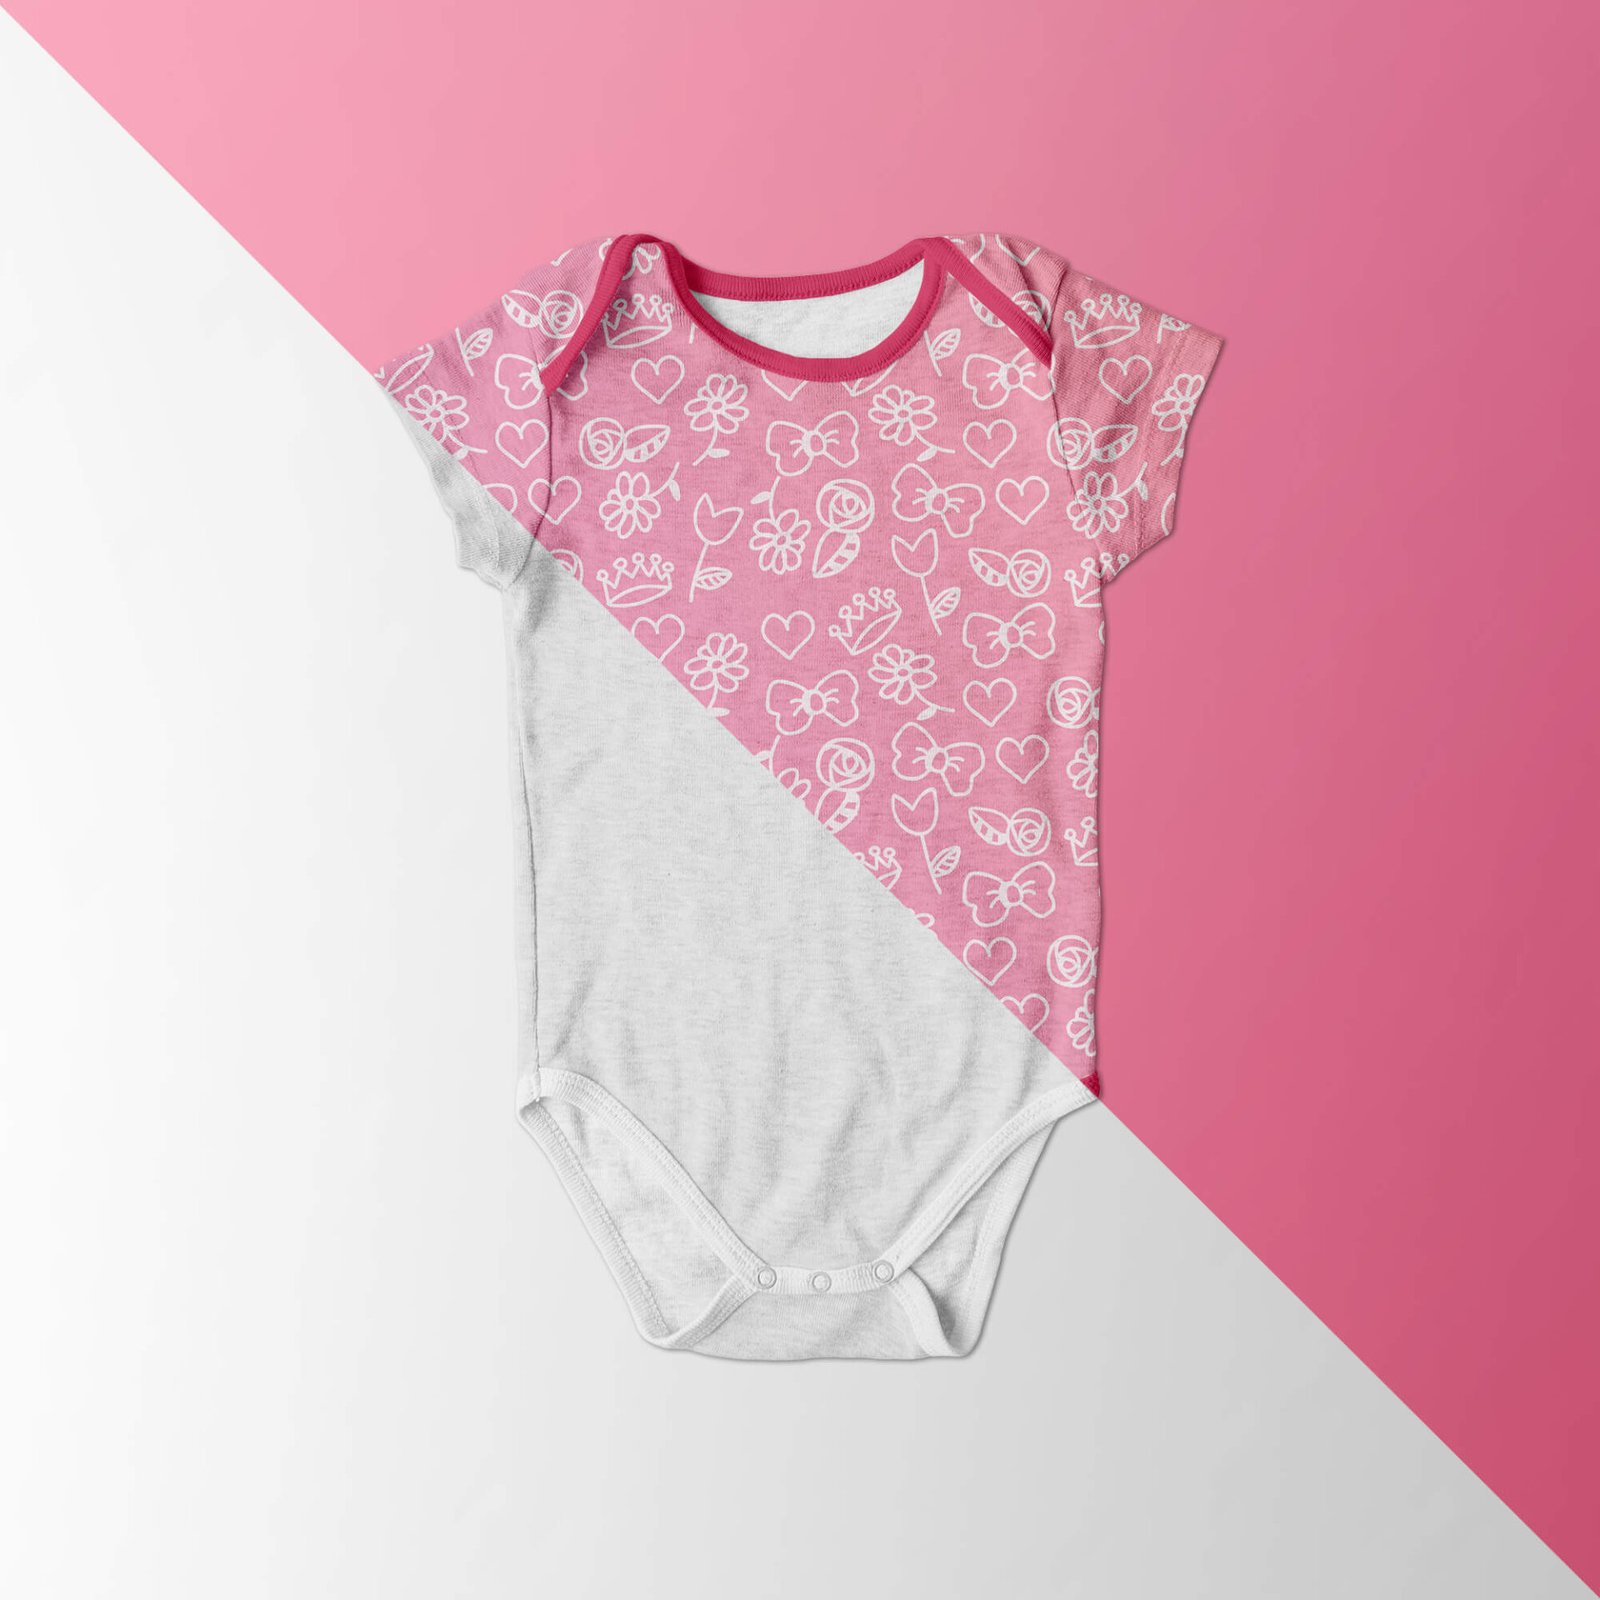 Download 20+ Cute Baby Clothes Mockup Onesie / Bodysuit PSD Template